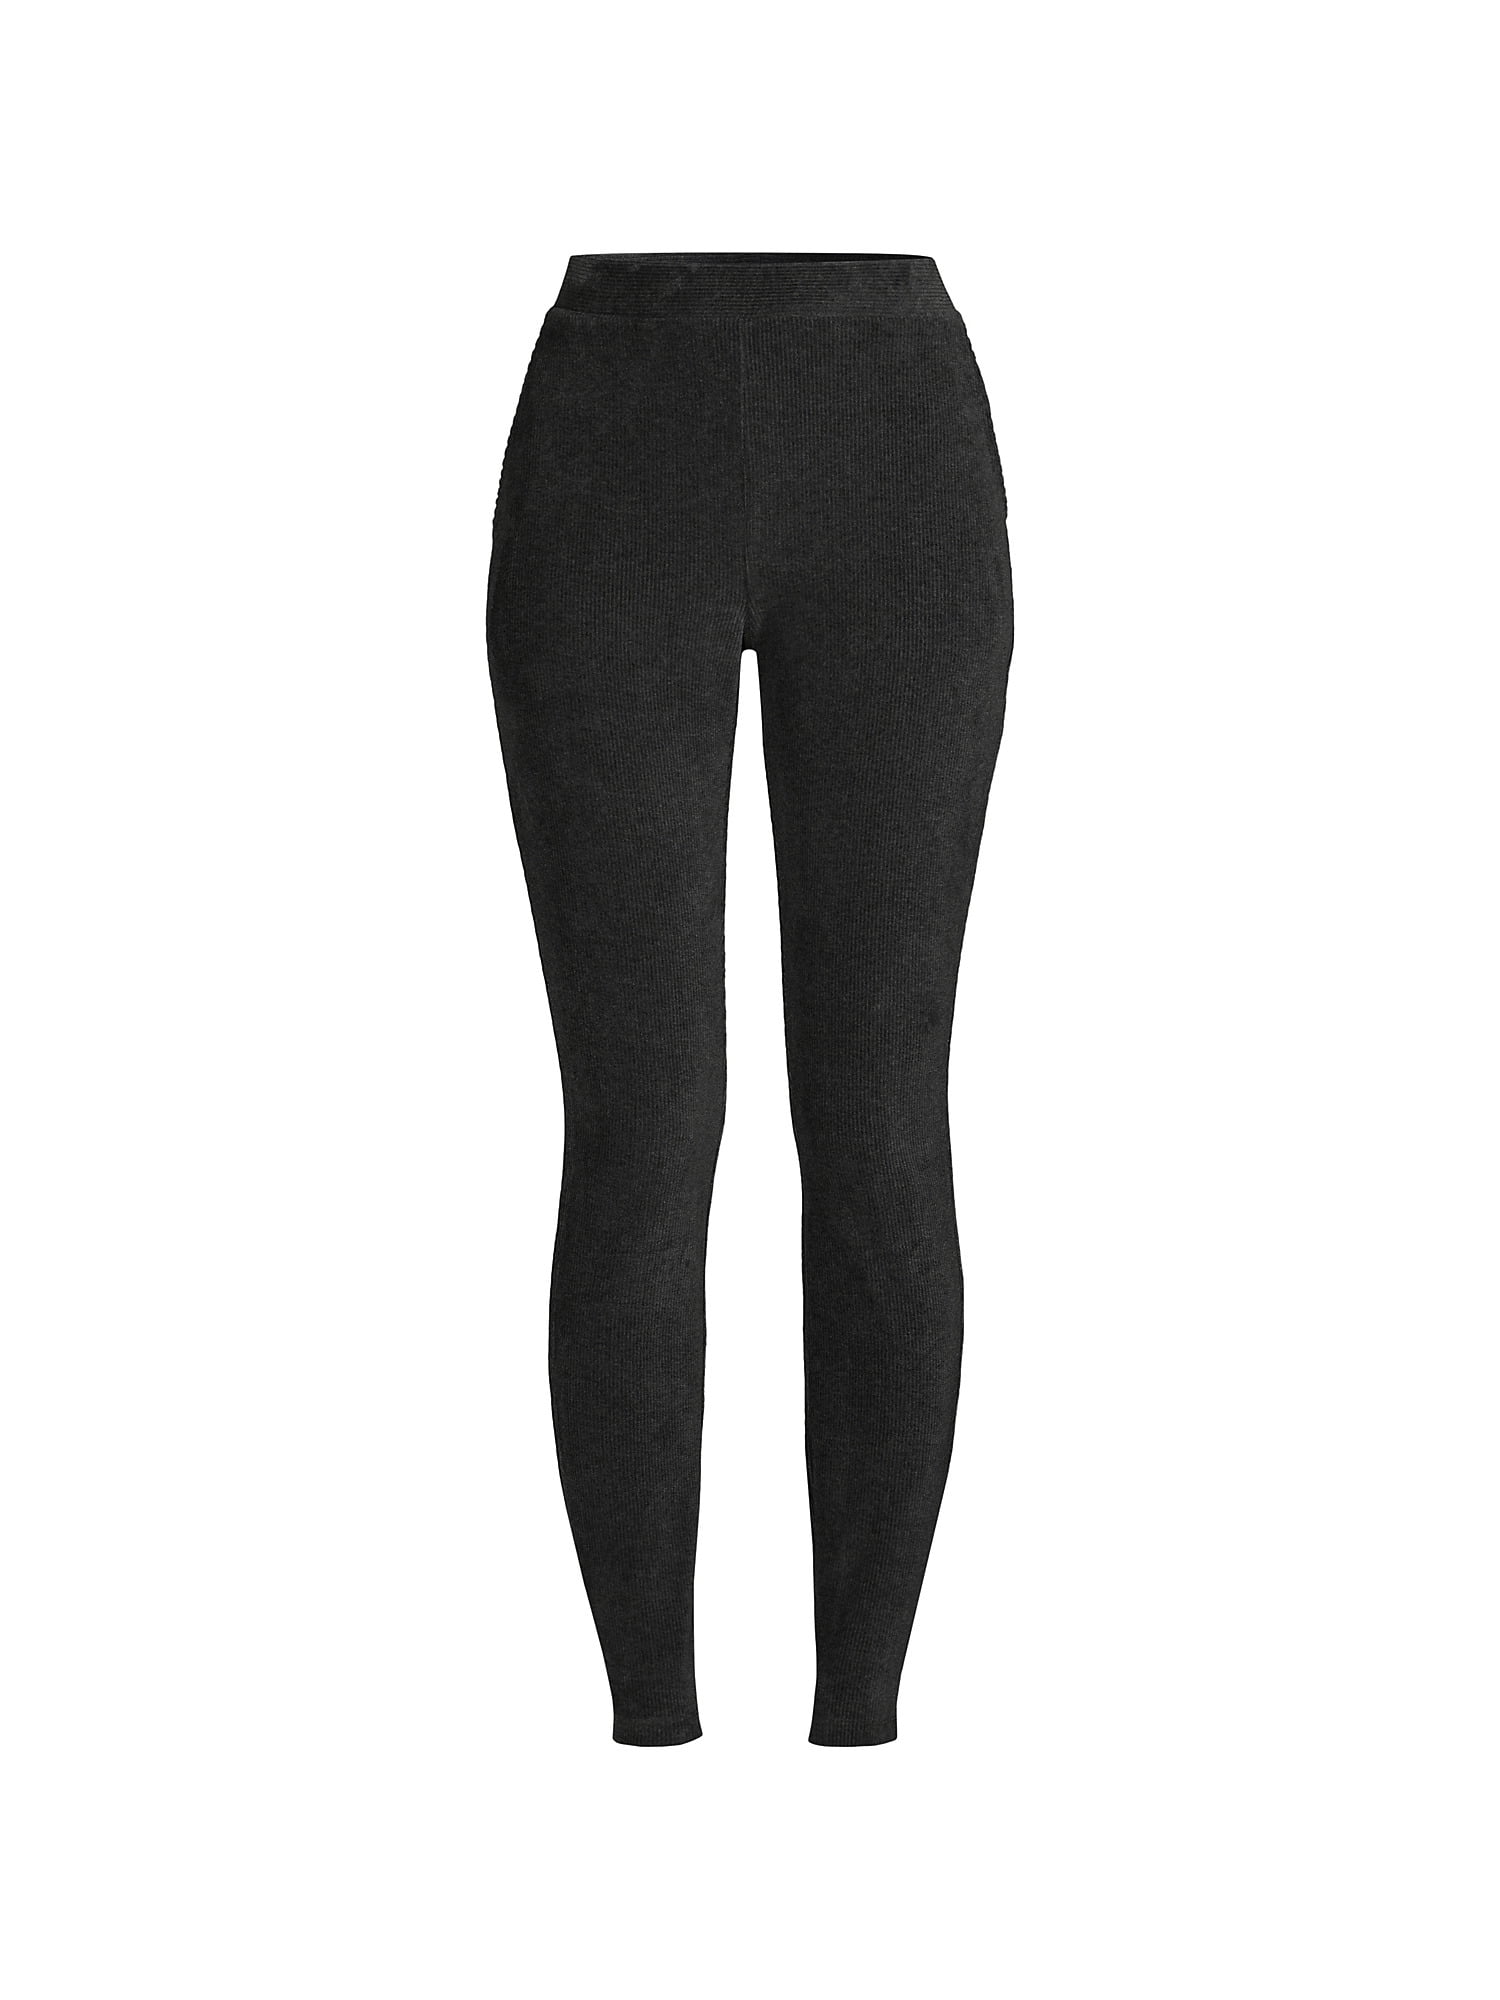 Lands' End Women s Sport Corduroy Leggings Charcoal Heather Petite X-Small  at  Women's Clothing store